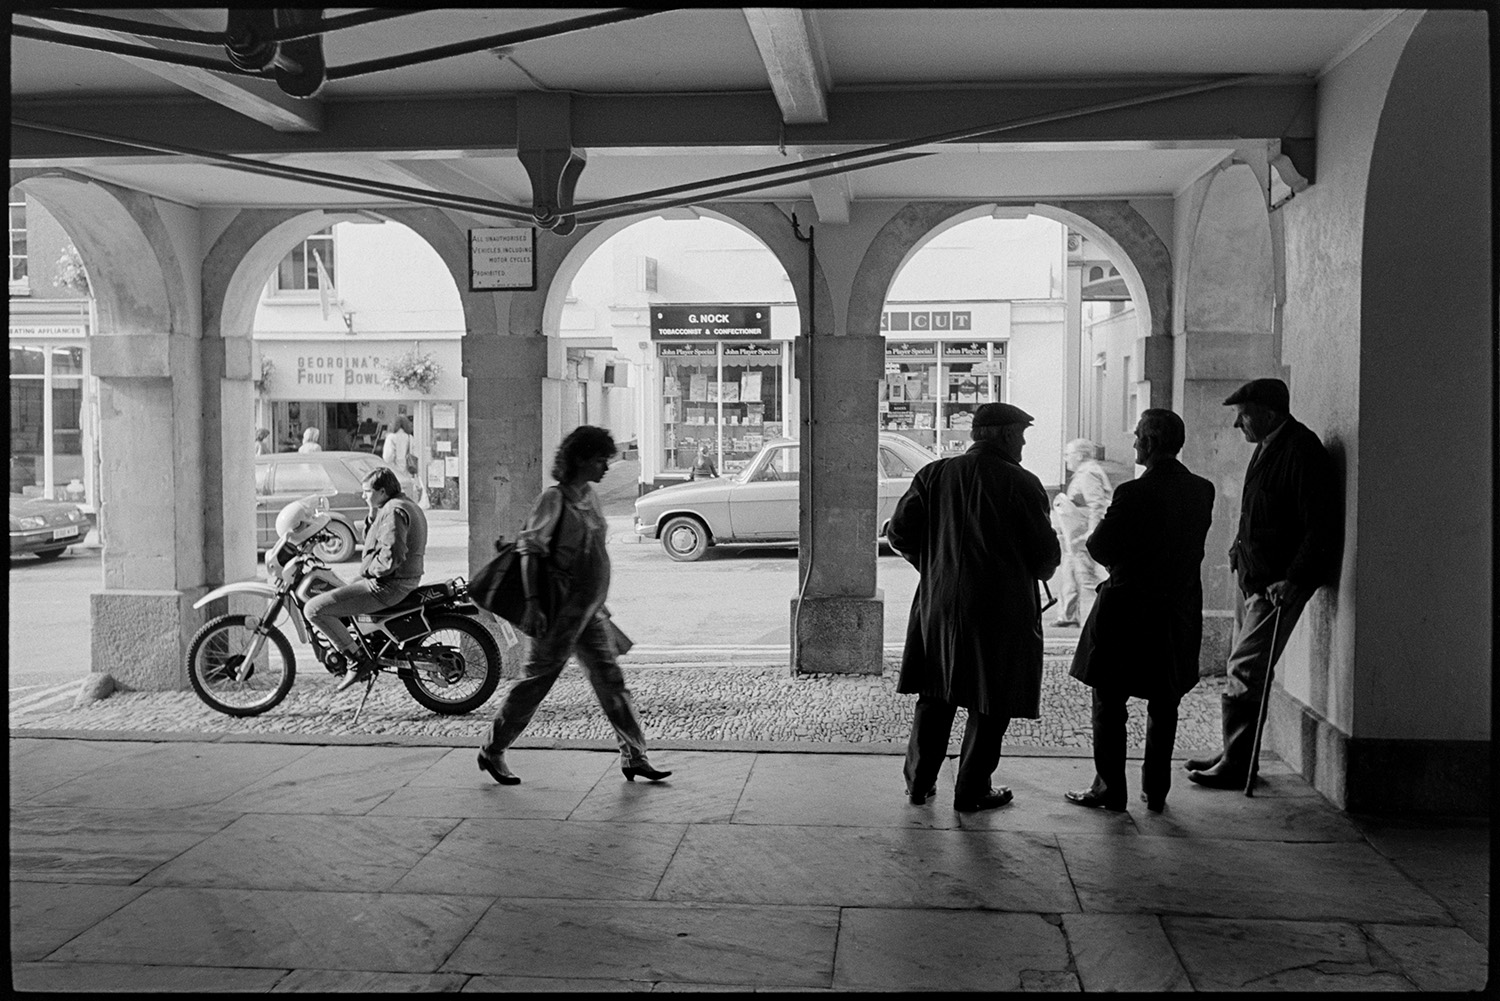 Men chatting under Town Hall arches, motorbike rider parked. 
[A woman walking past three men talking under the arches of the Town Hall in Torrington. A motorcyclist is also sat on his parked motorbike on the cobbles under the arches.]